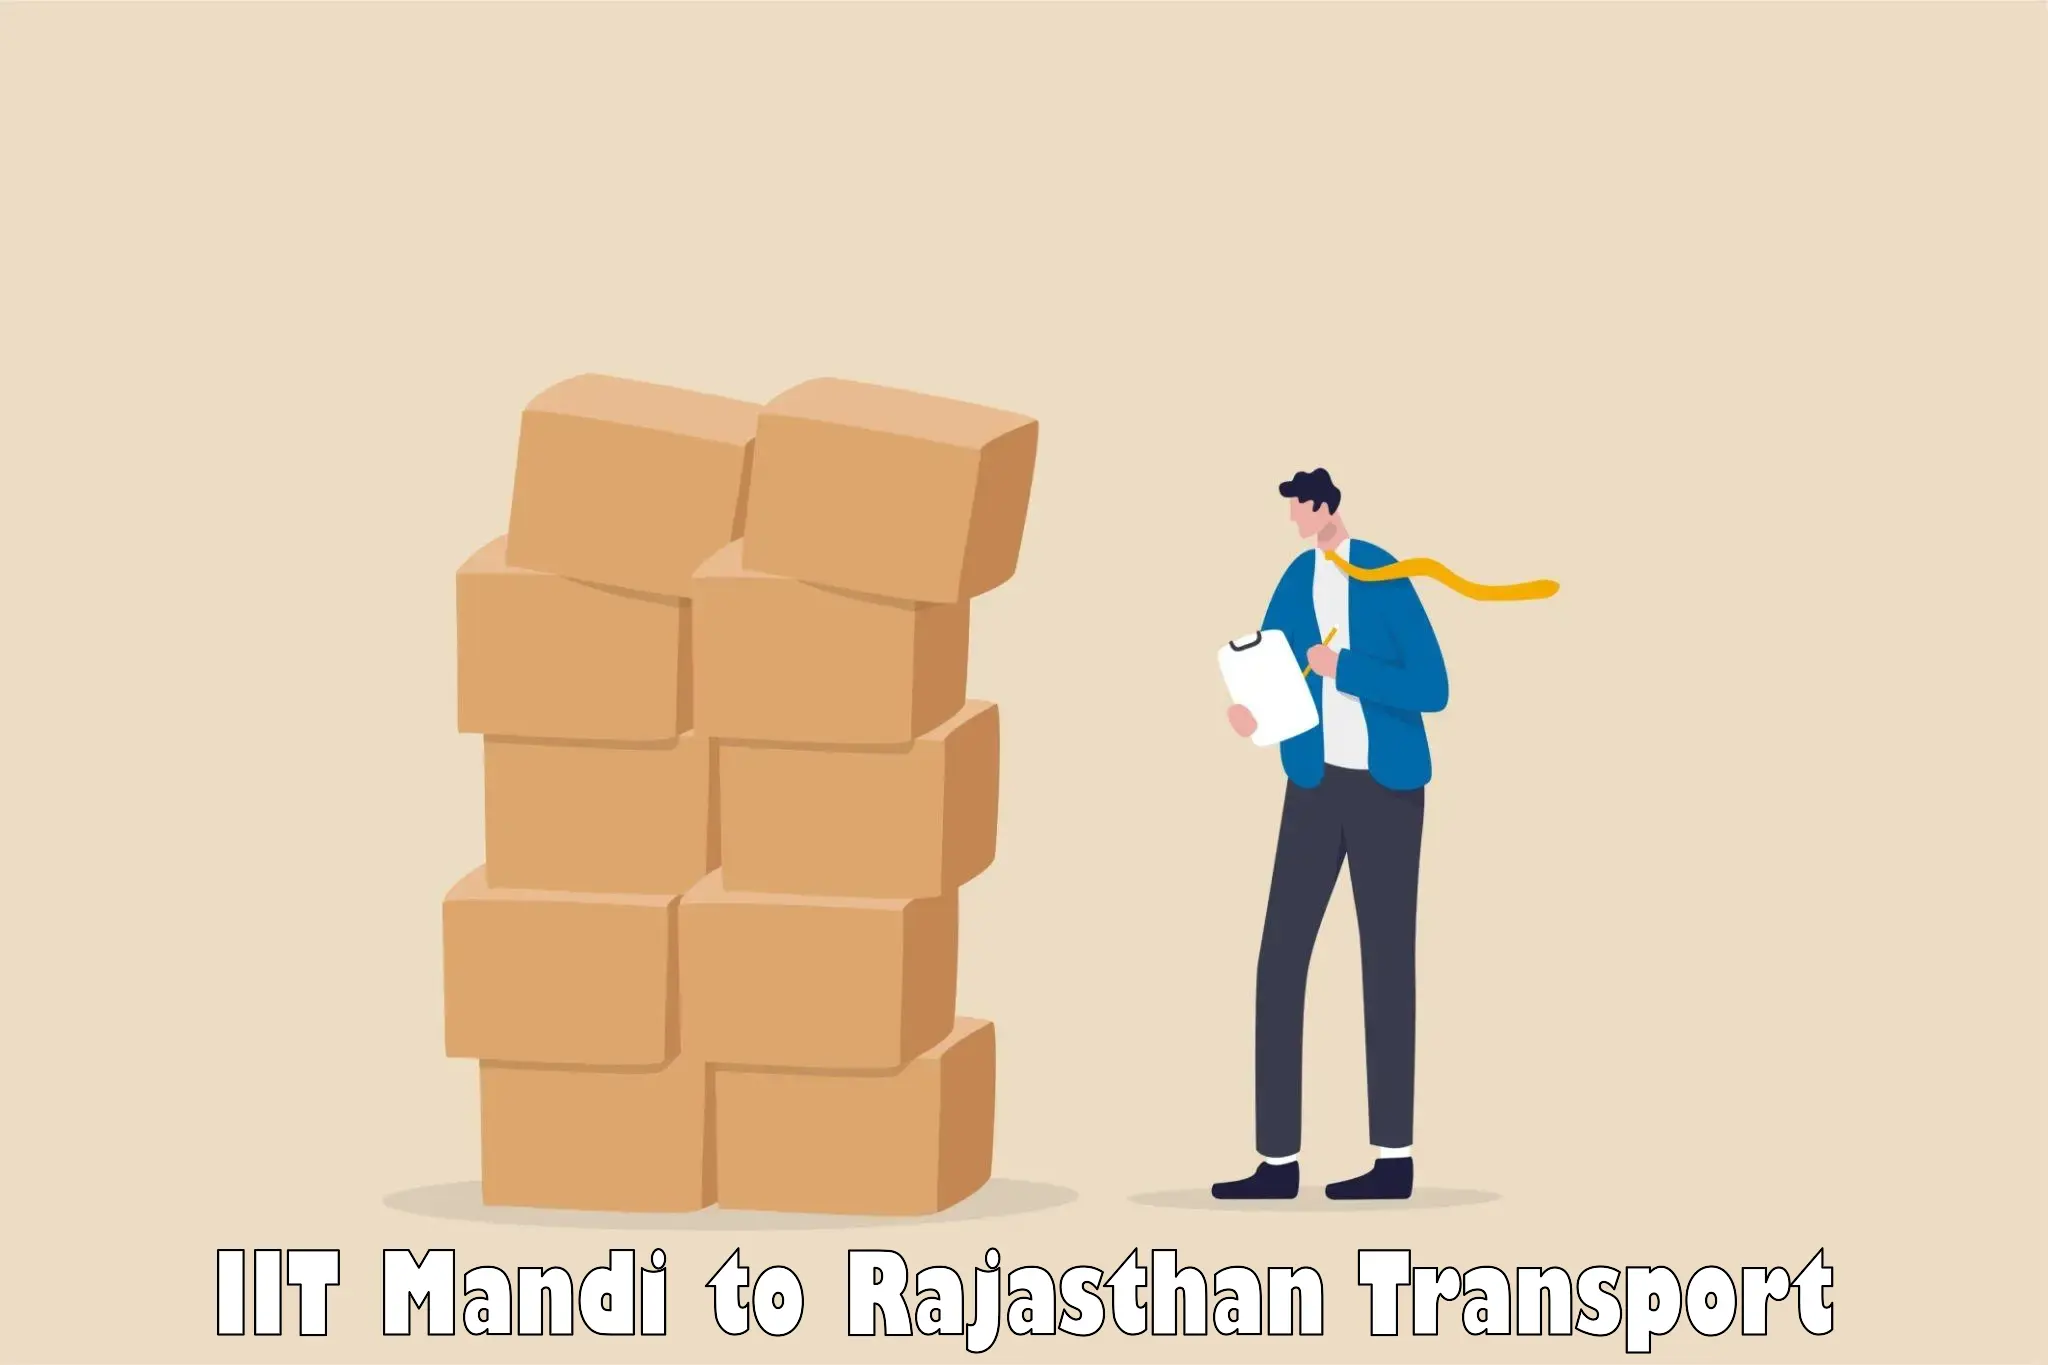 All India transport service IIT Mandi to Yeswanthapur